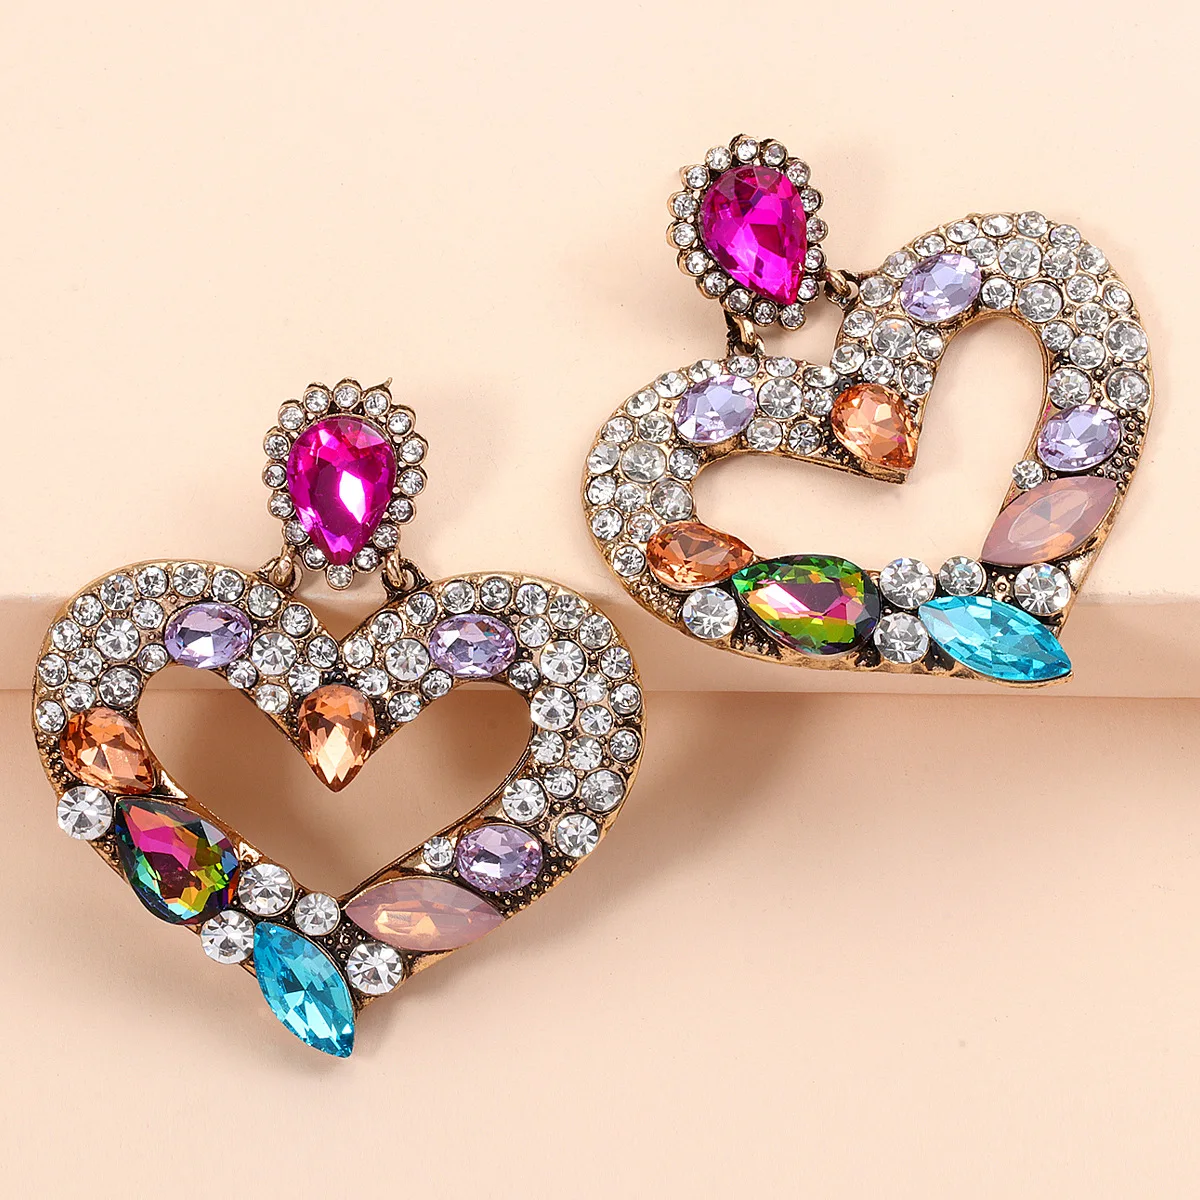 

Fashion Women Palace Vintage Jewelry Hollow out Diamond Heart Stud Earrings Colorful Retro Rhinestone Heart Earrings for Ladies, Picture shows